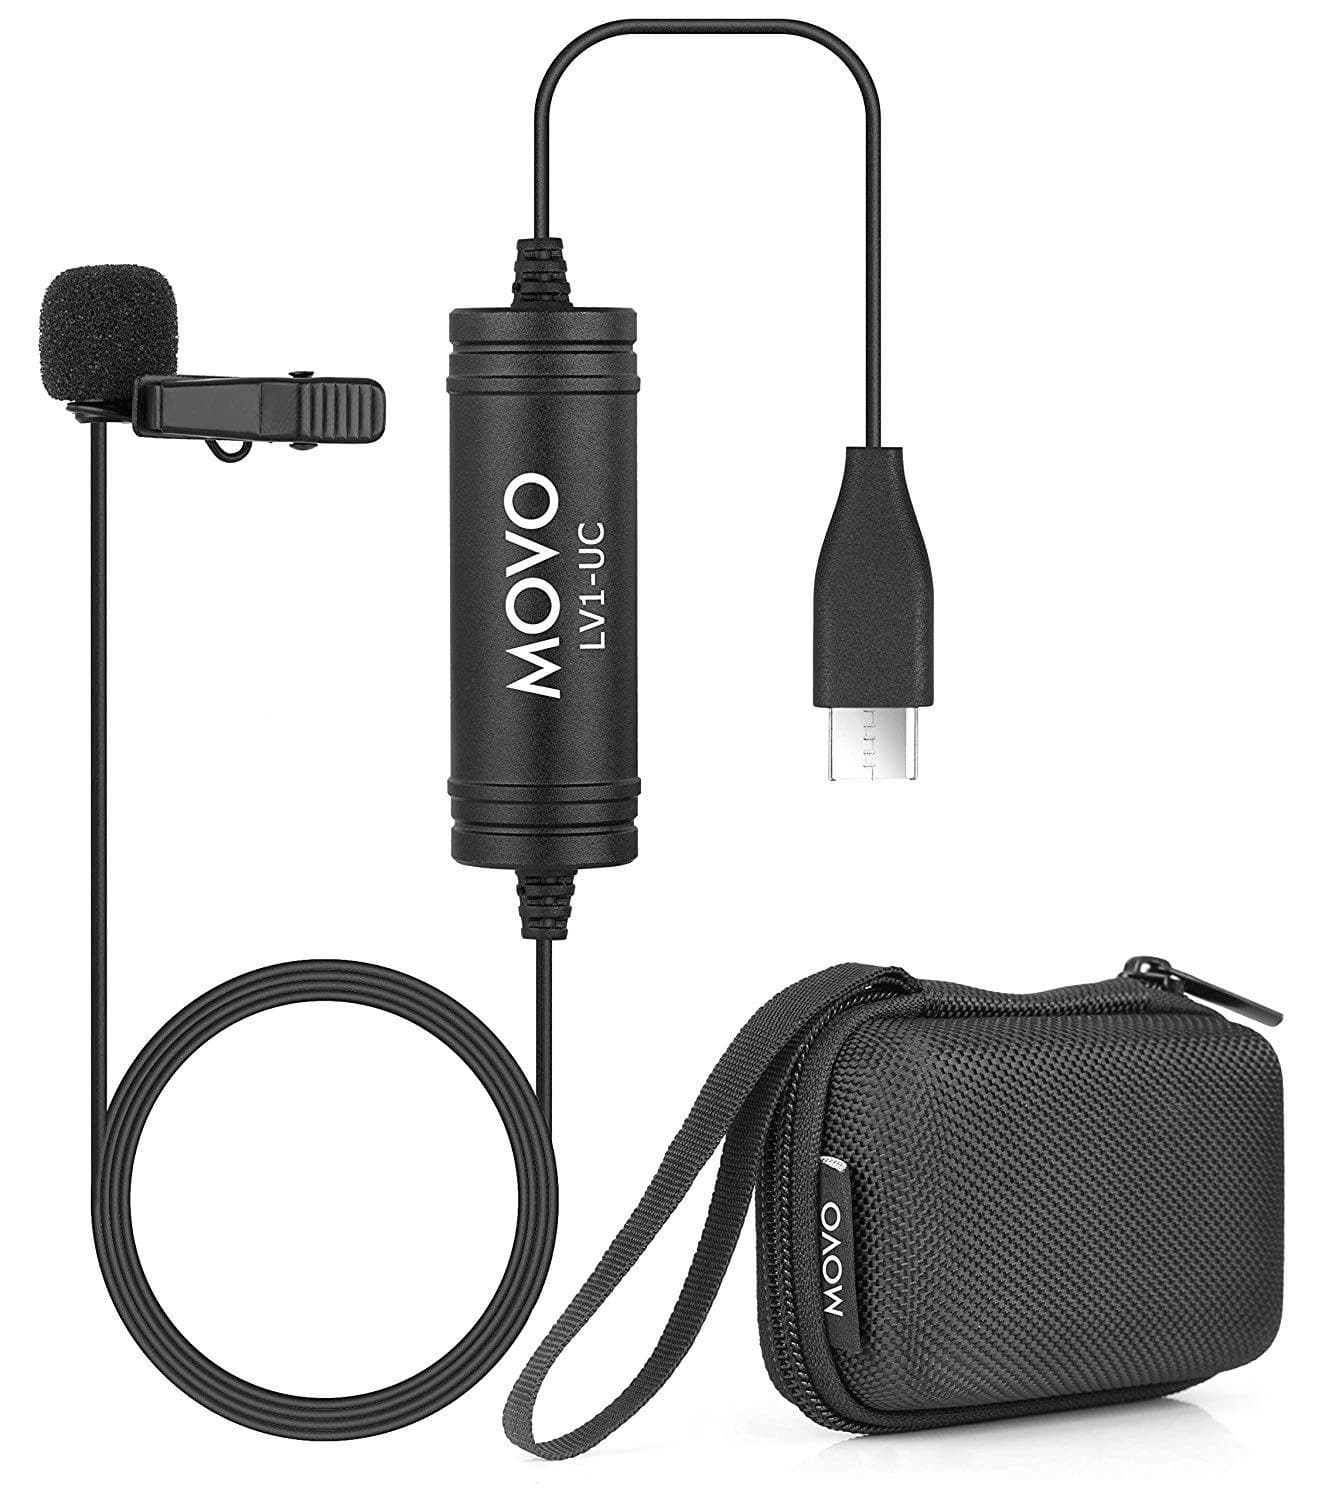 Xvive LV1 Lavalier Microphone Small Omni-Directional Wearable Microphone  for Wireless go,Recording Device,Black